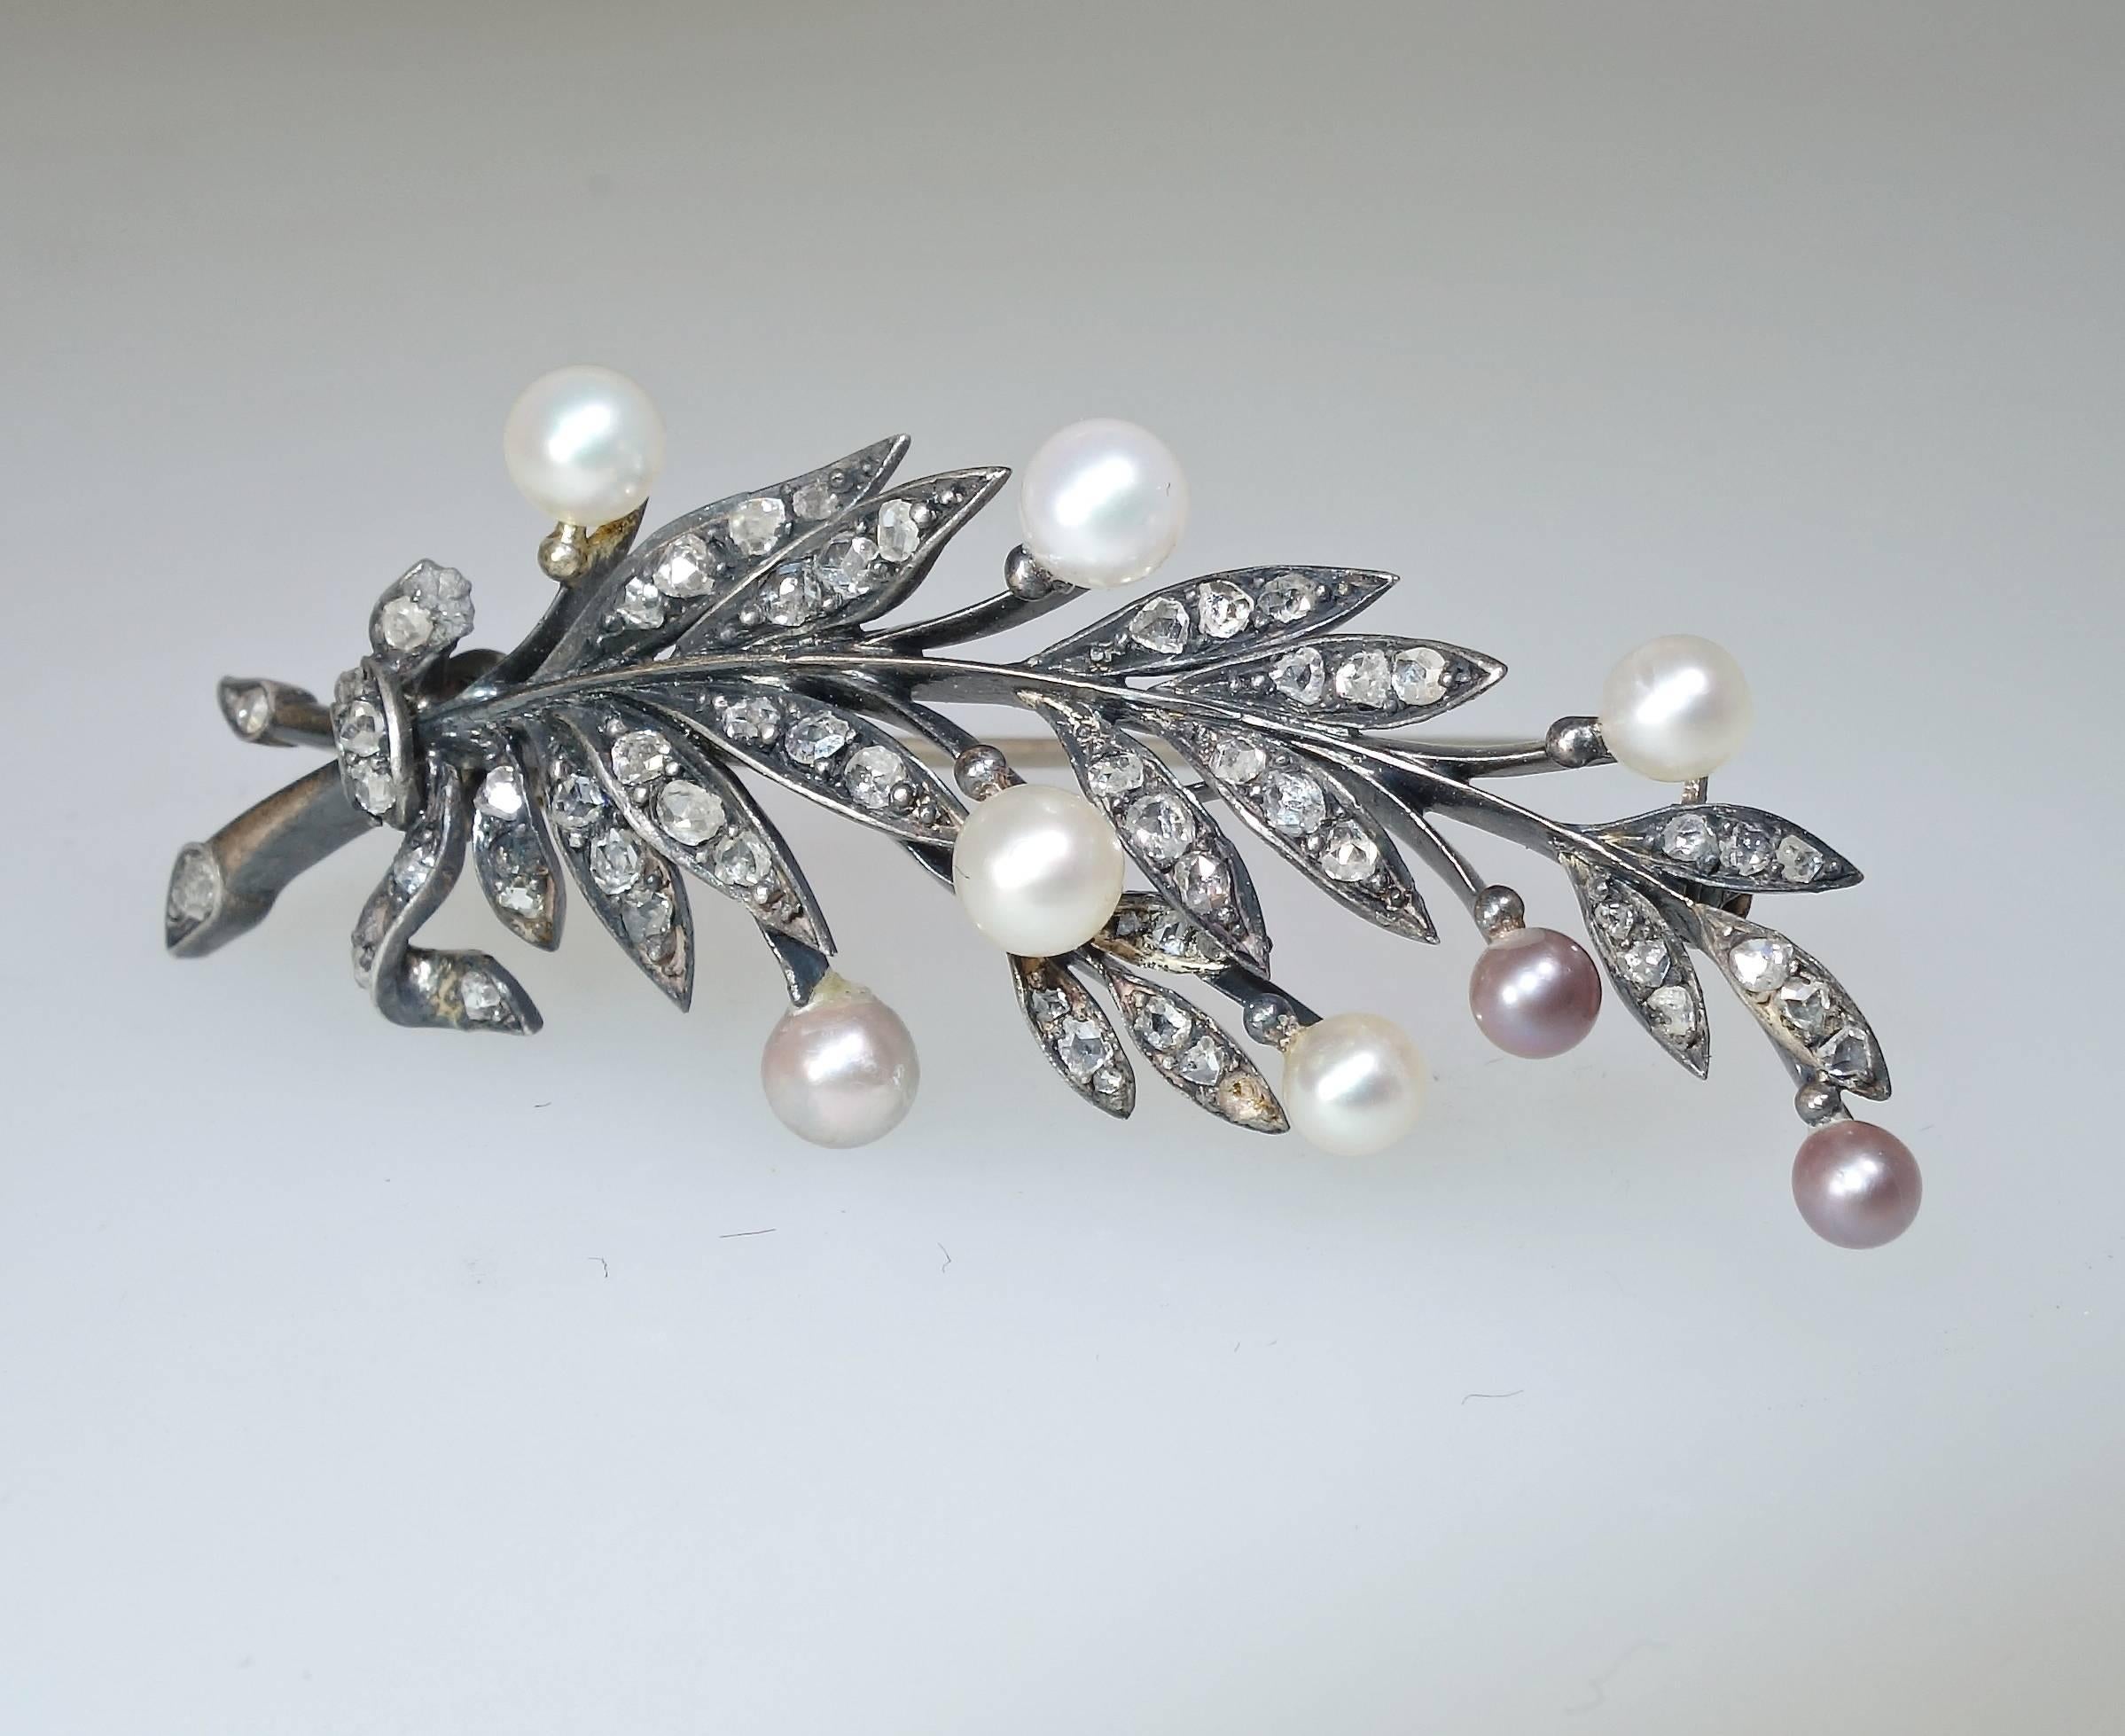 Fine natural pearls, 8, are set on posts in this very early 19th Century brooch.  The diamonds are rose cuts and bead set in silver backed with gold. The pin stem has been replaced, probably in the early 20th century.  The piece is just over 2